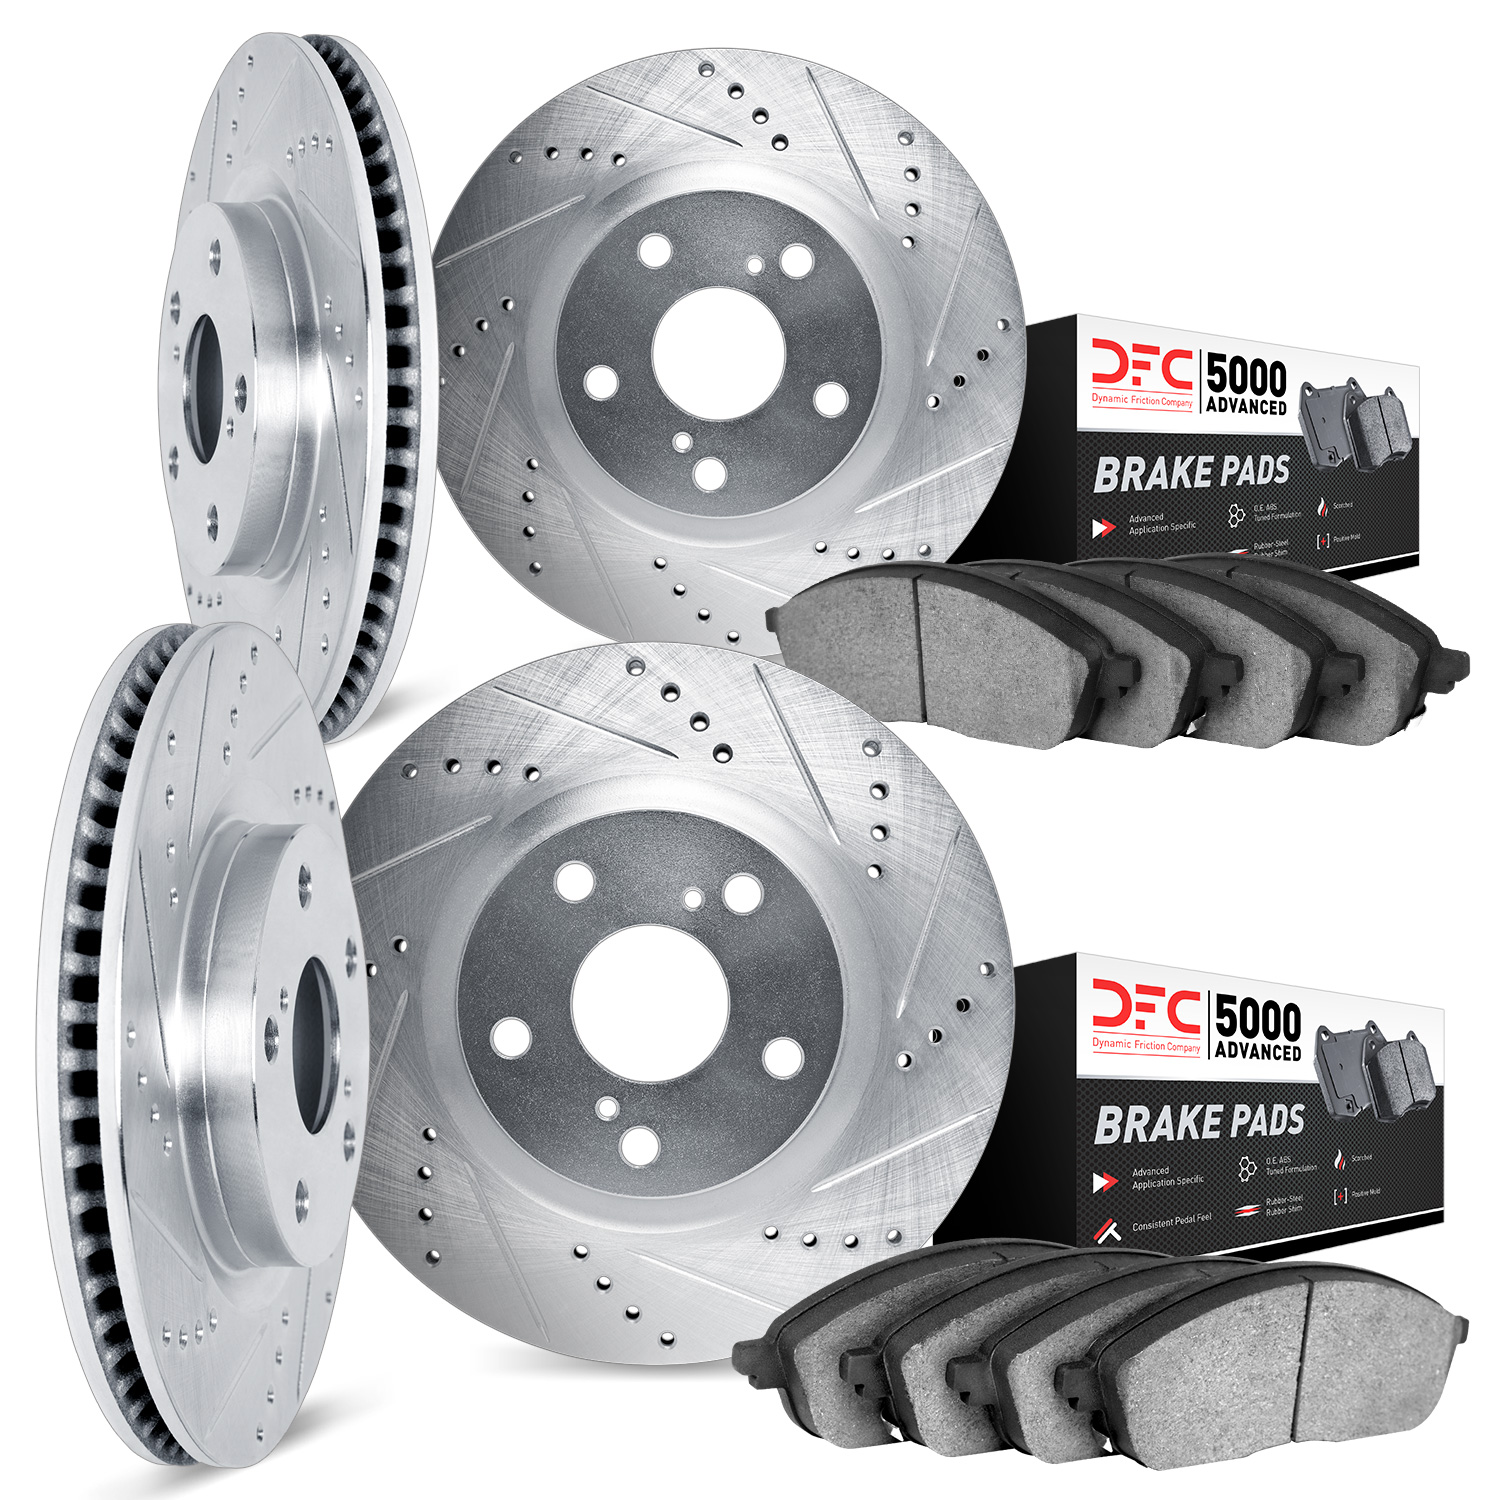 7504-54303 Drilled/Slotted Brake Rotors w/5000 Advanced Brake Pads Kit [Silver], 2007-2010 Ford/Lincoln/Mercury/Mazda, Position: